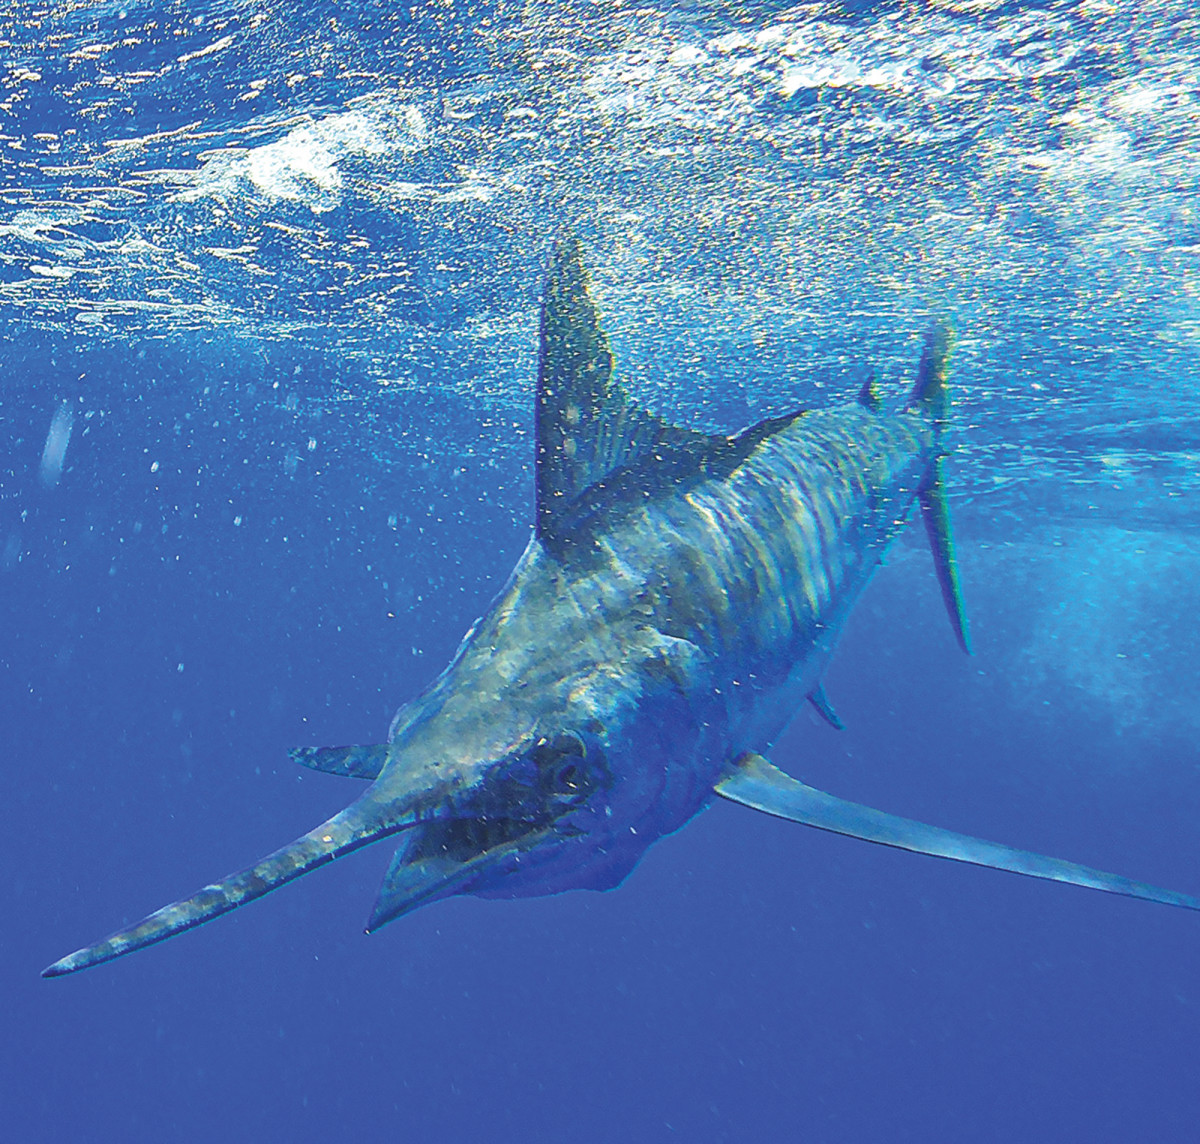 Clear water and a blue marlin makes for a colorful combination.